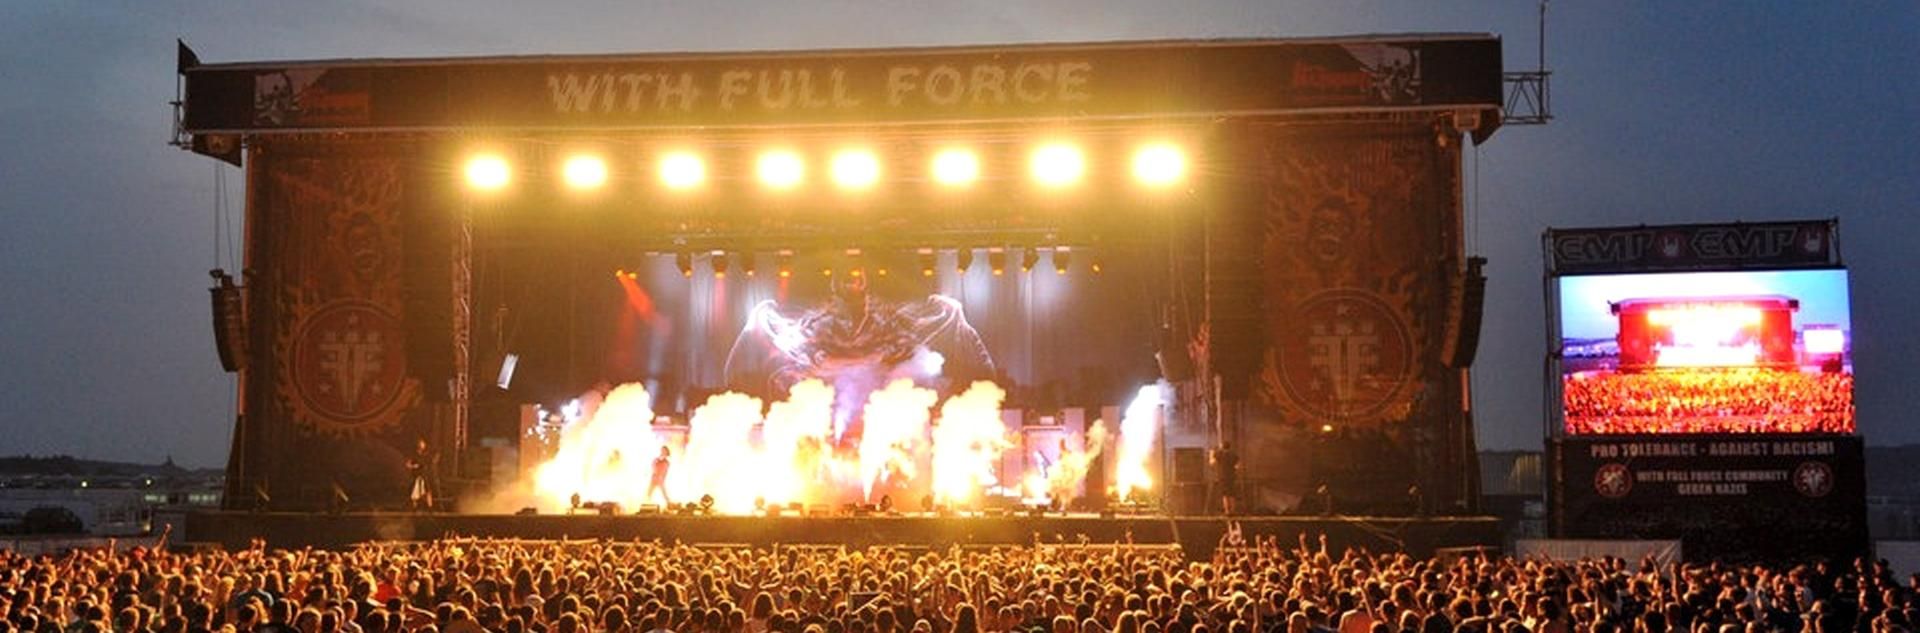 Konzert: With Full Force 2015